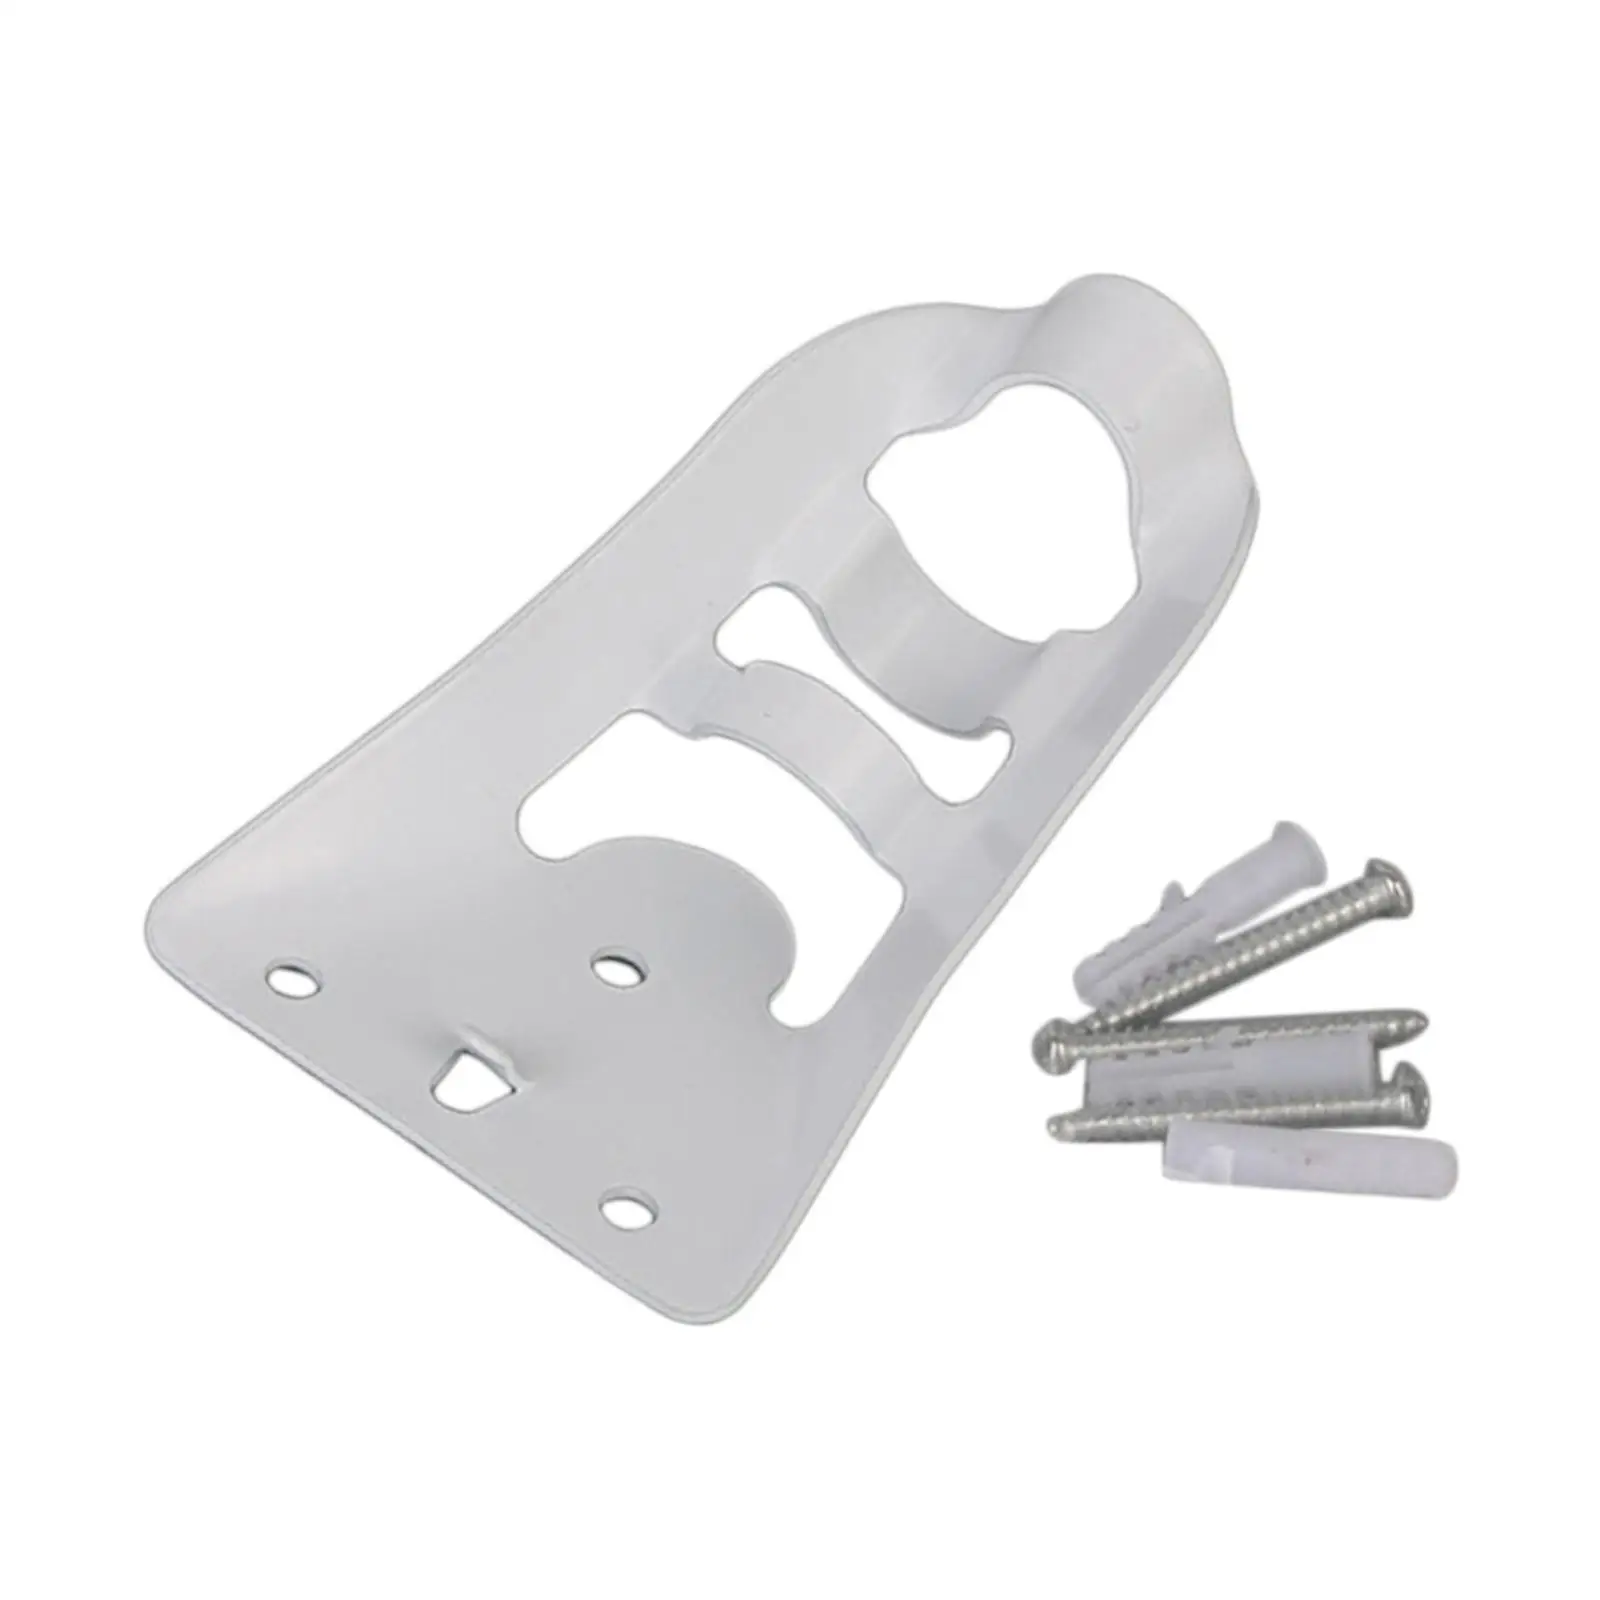 Flagpole Holder Base Fittings Iron with Screws Mounting Durable White for Garden Patio Porch